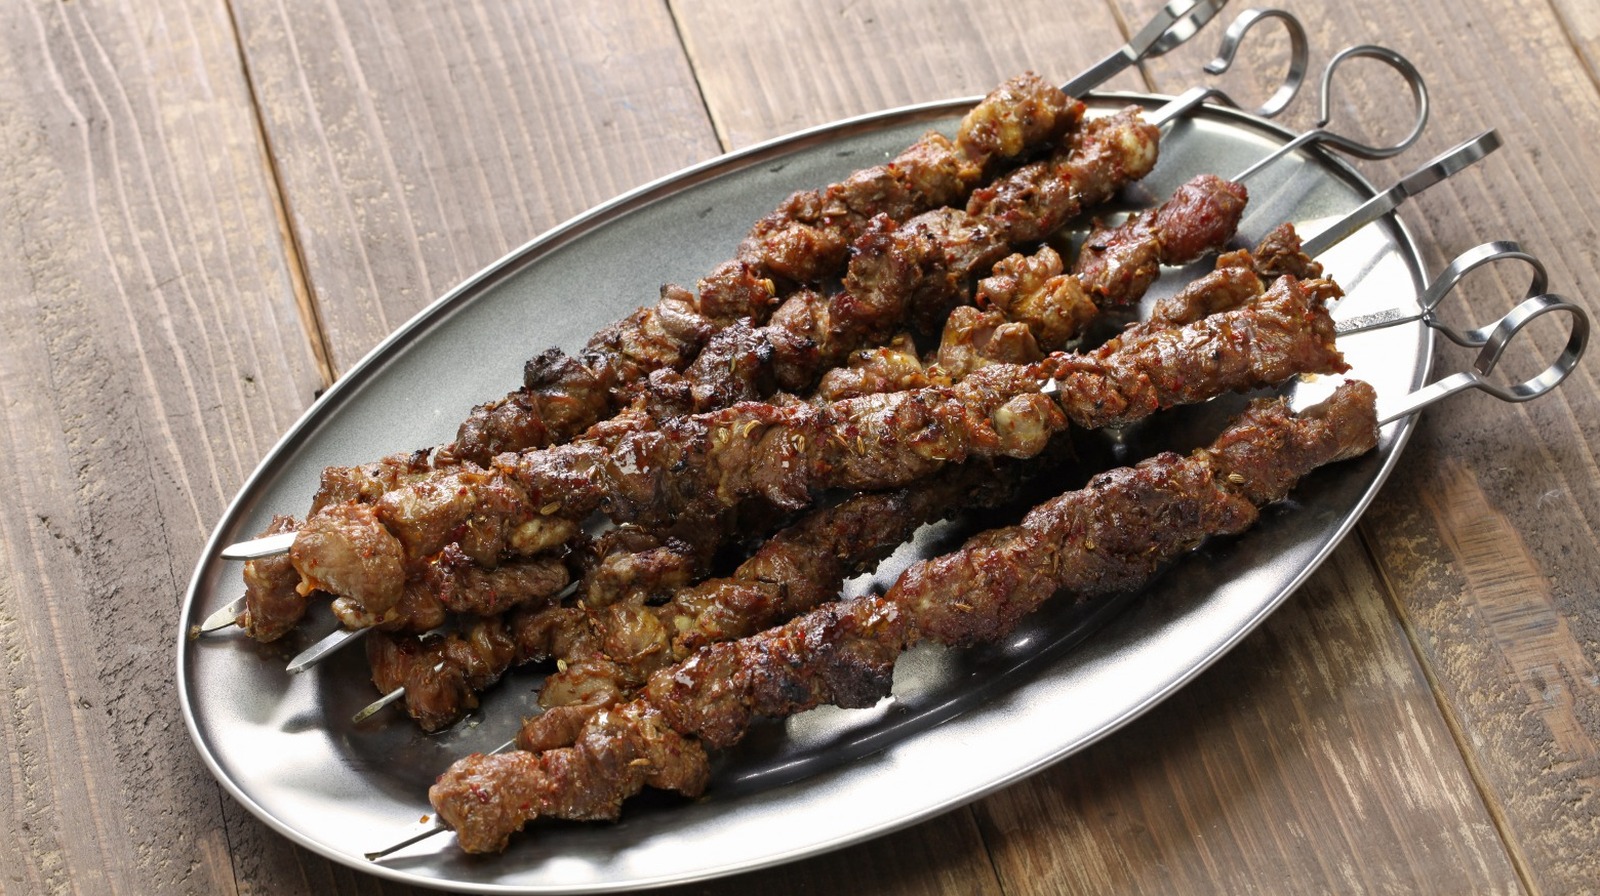 Chinese Lamb Skewers (Yang Rou Chuan'r, 羊肉串儿) - Red House Spice